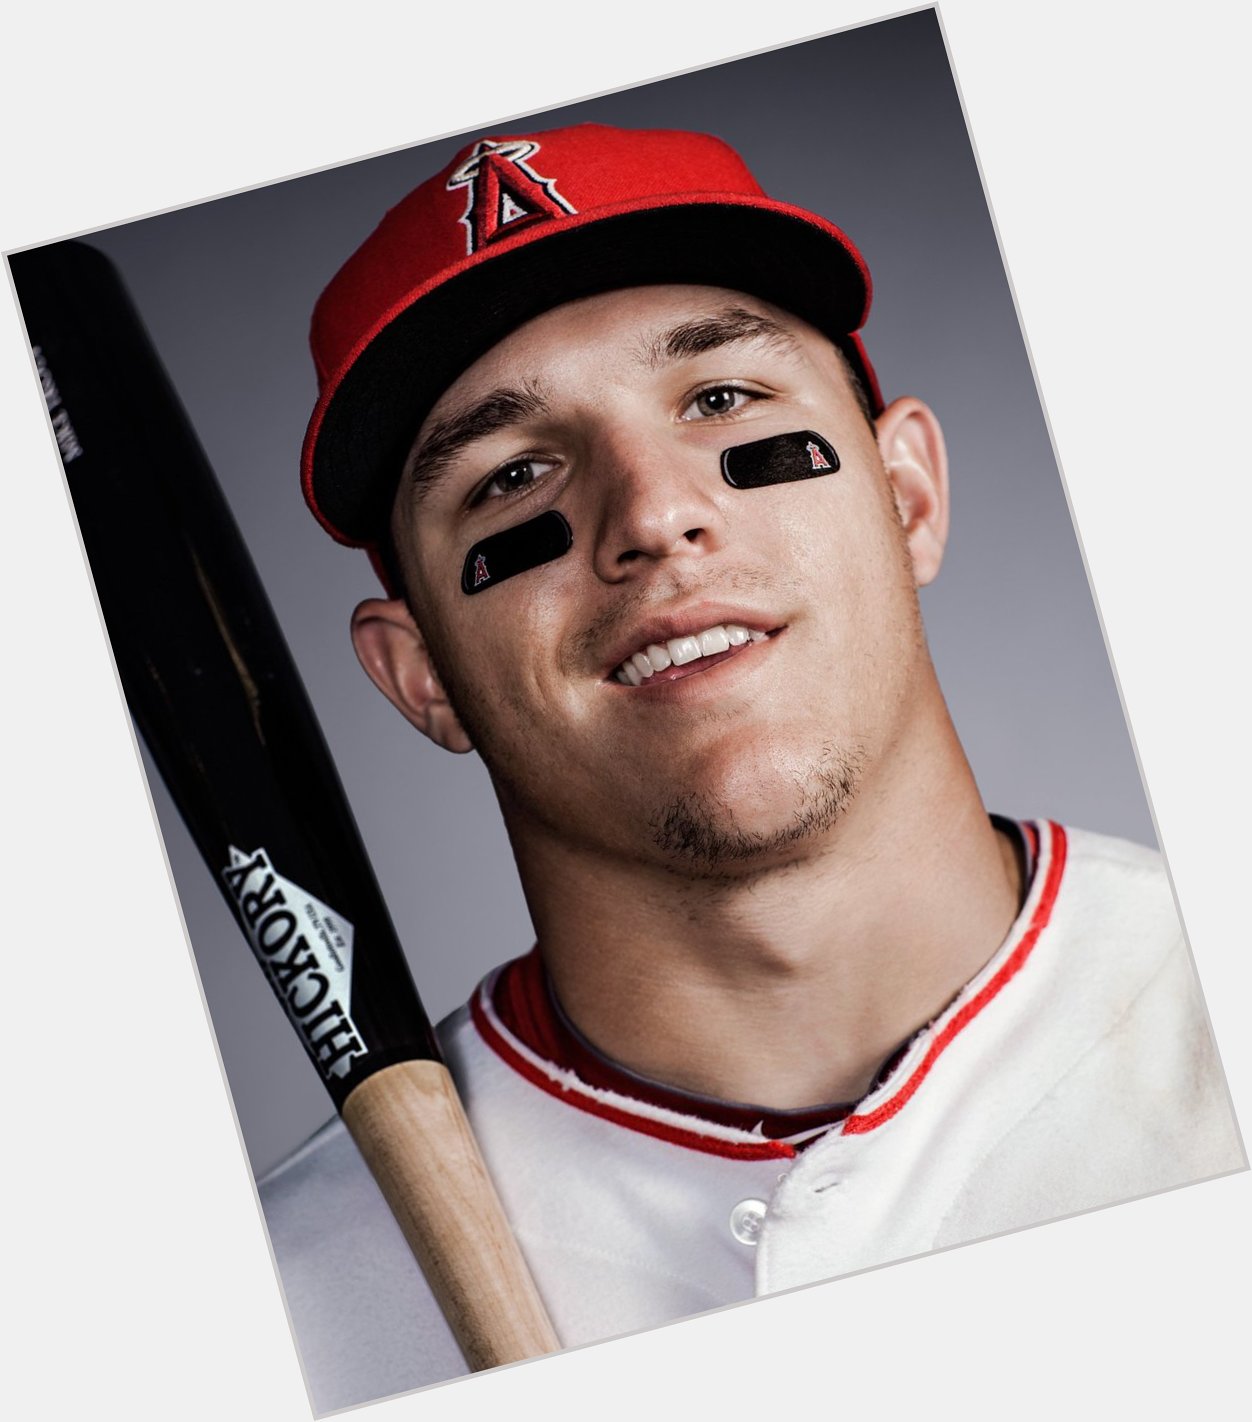 Happy birthday to one of the best players in the game, Mike Trout! 